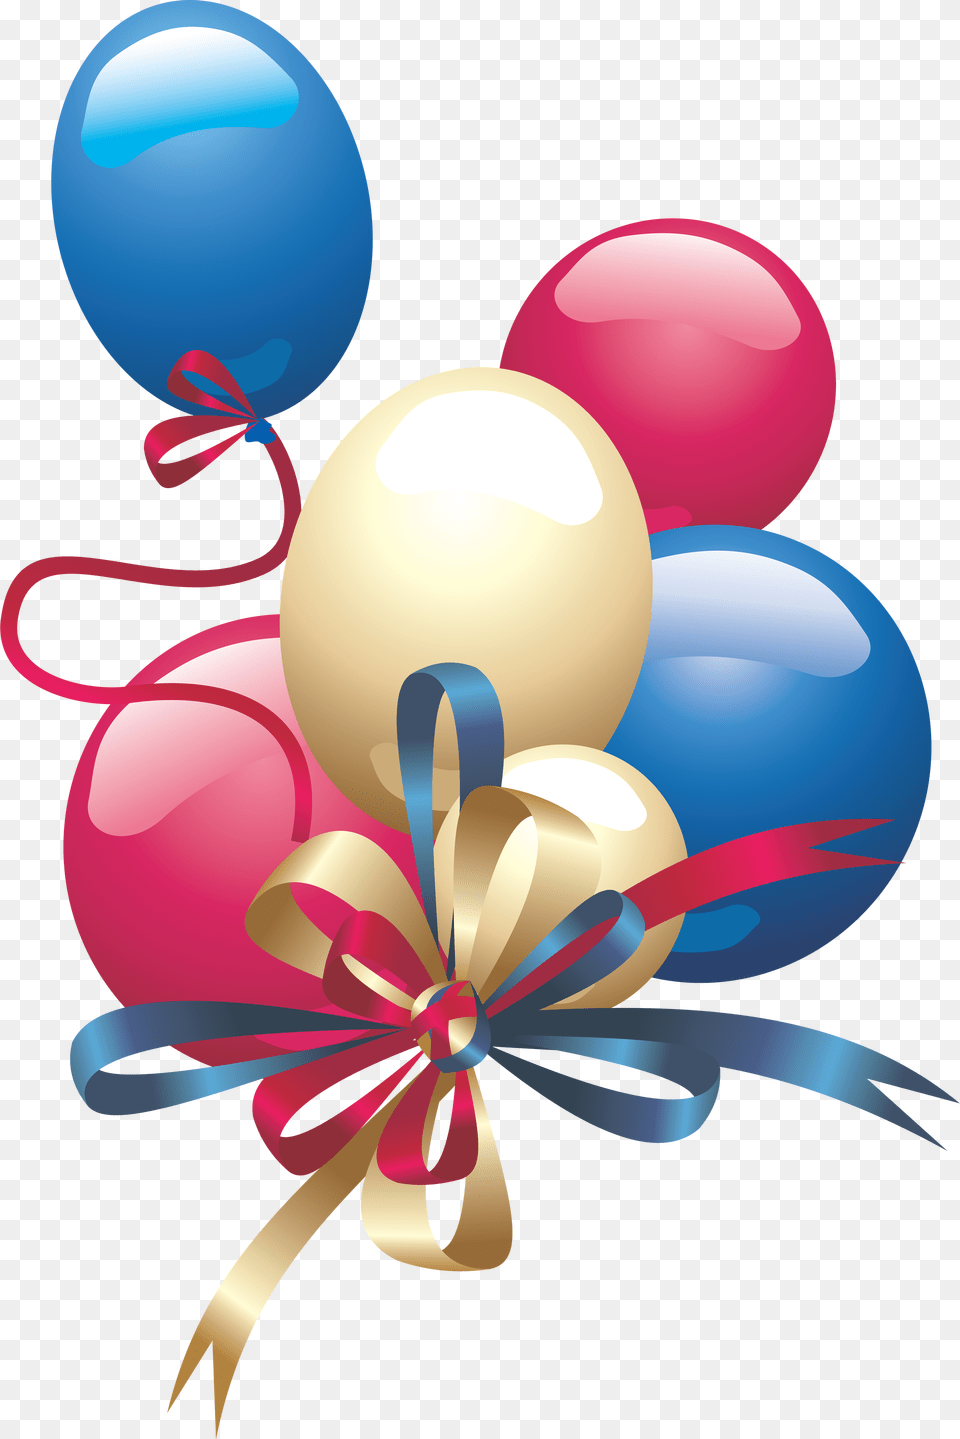 Balloons With Ribbon Knotted Images Download Birthday Balloon Hd Free Png